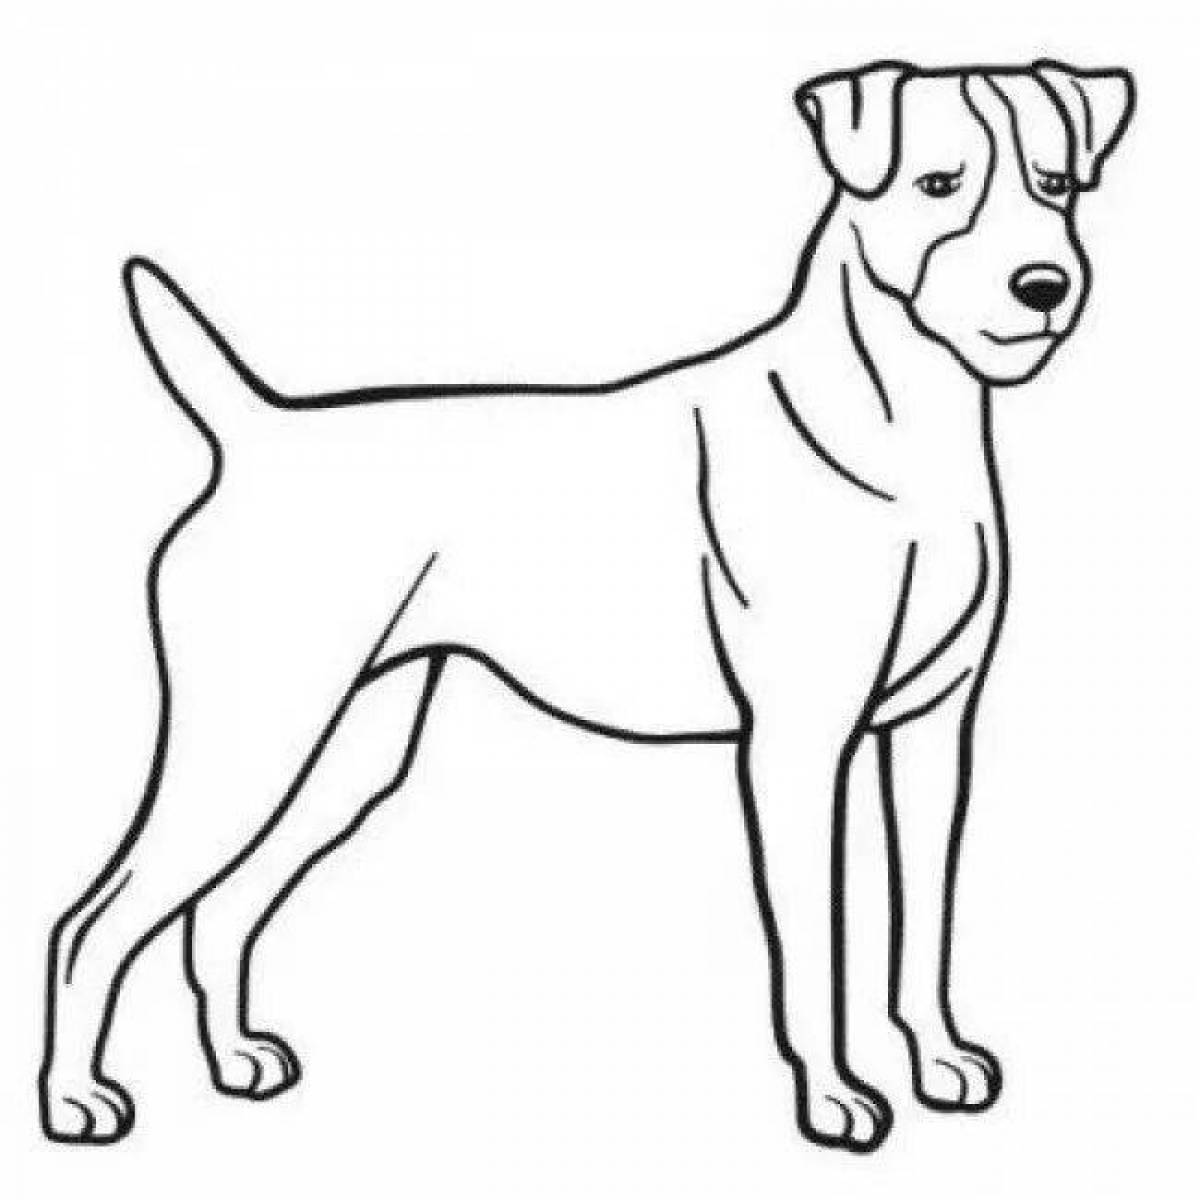 Jack russell animated coloring page